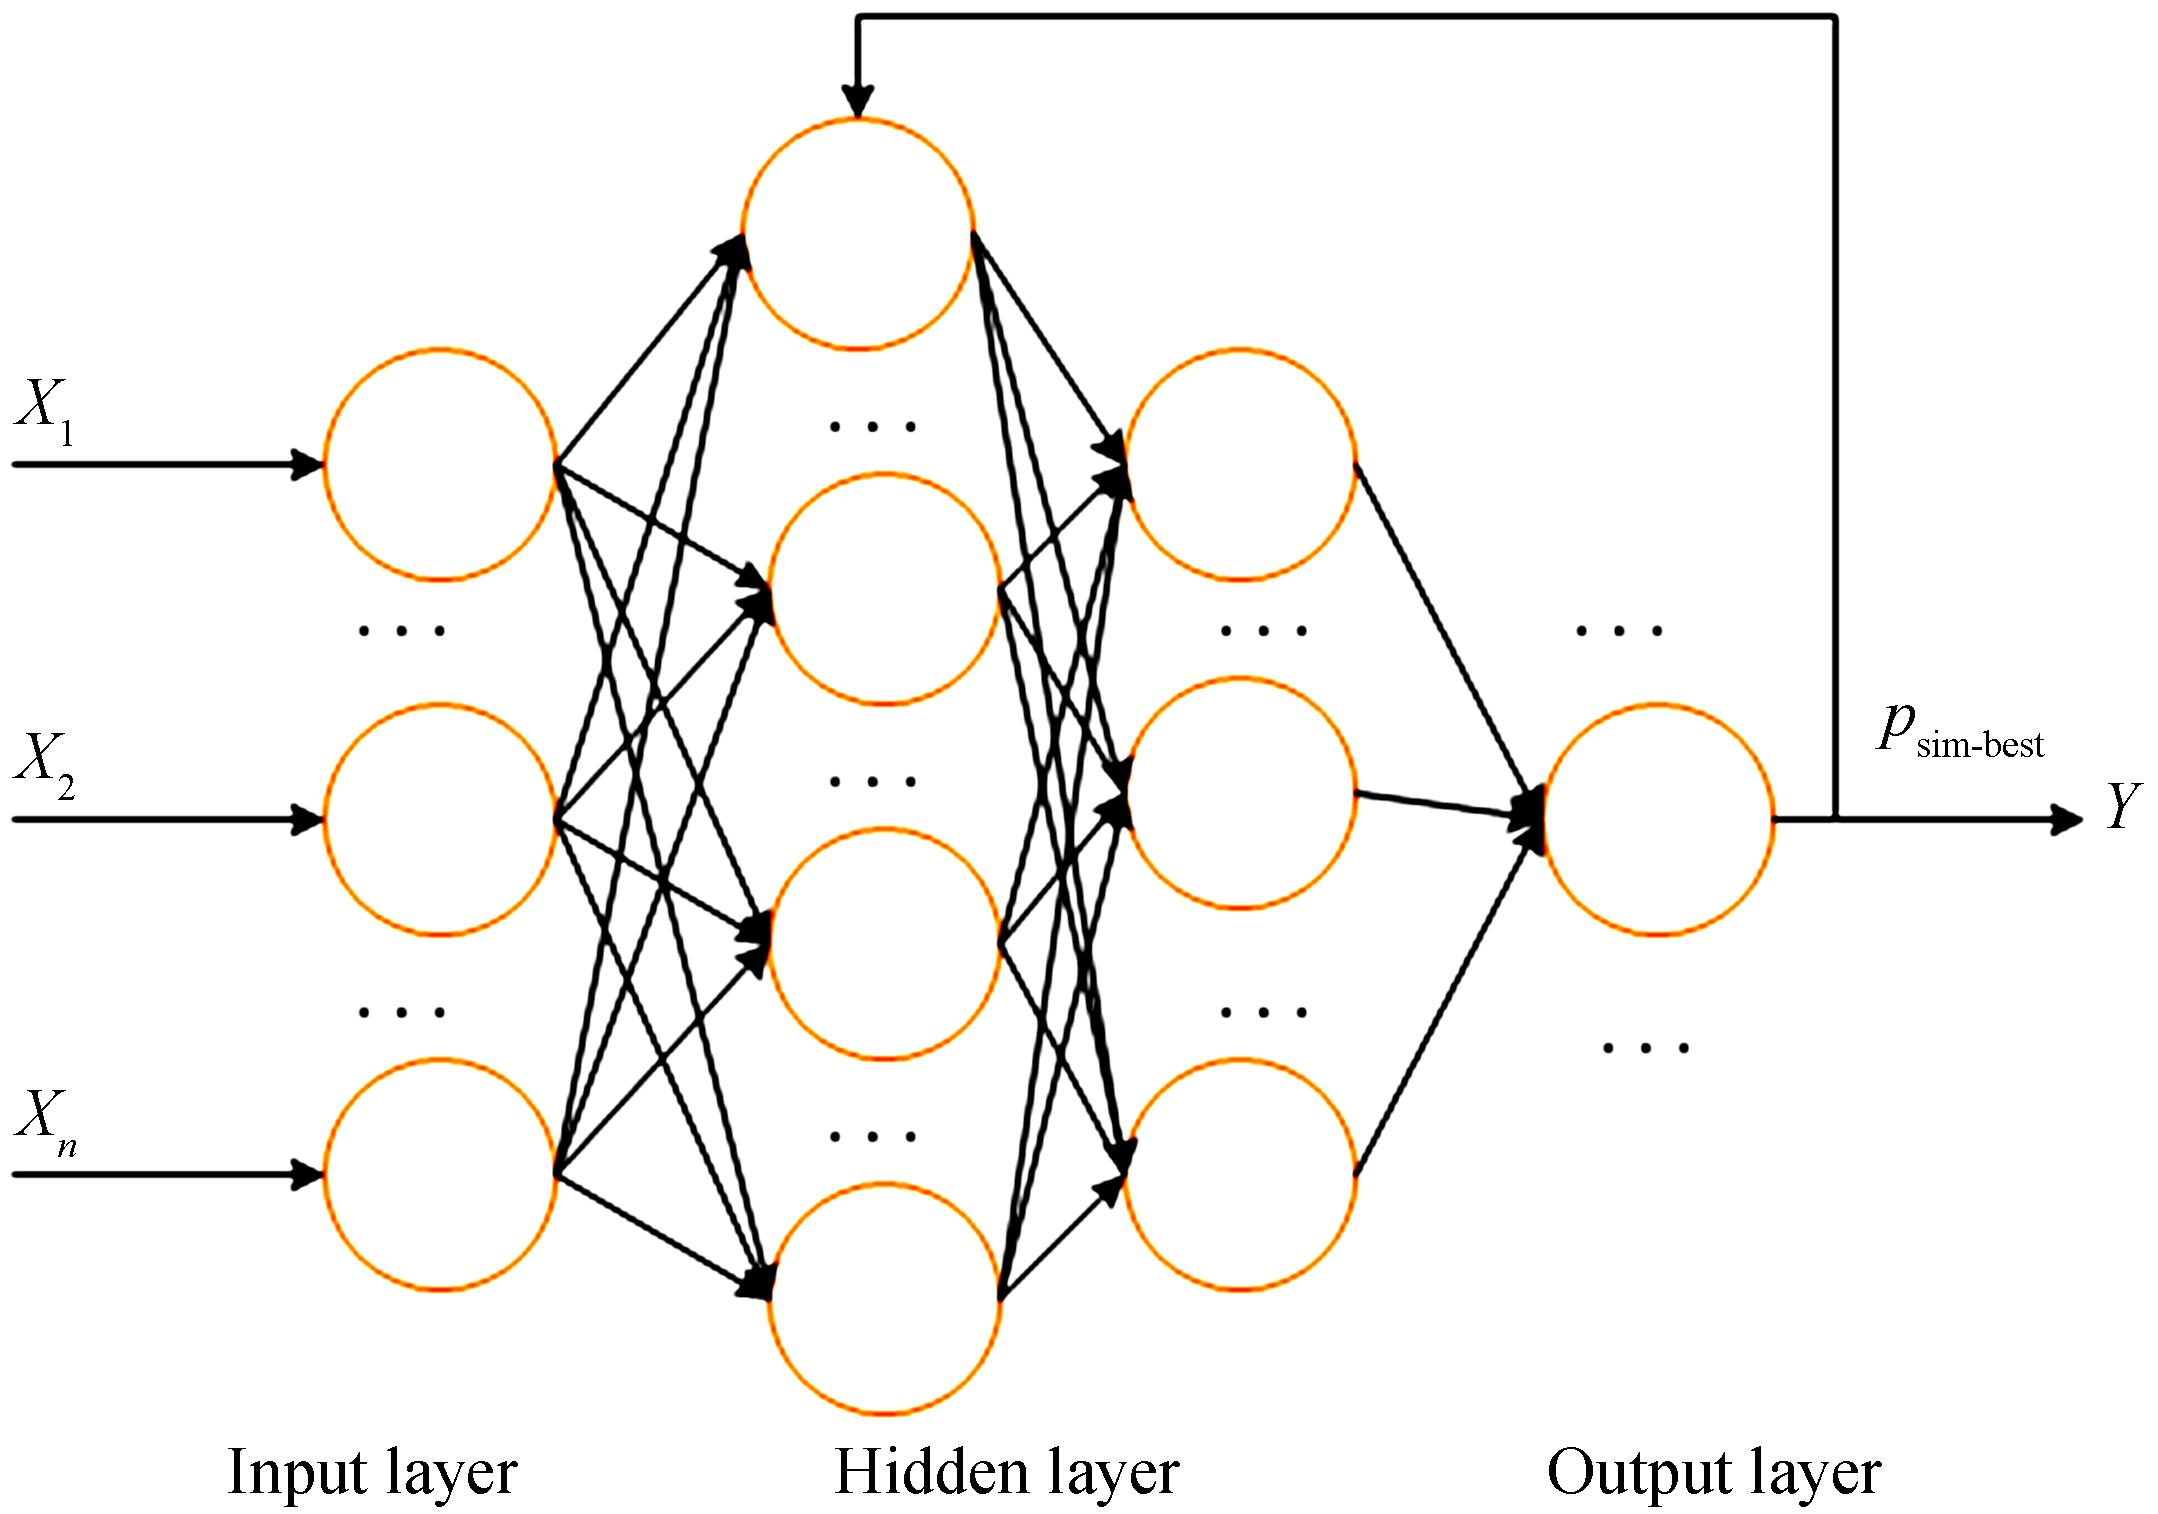 Structure of PSO-BP neural network